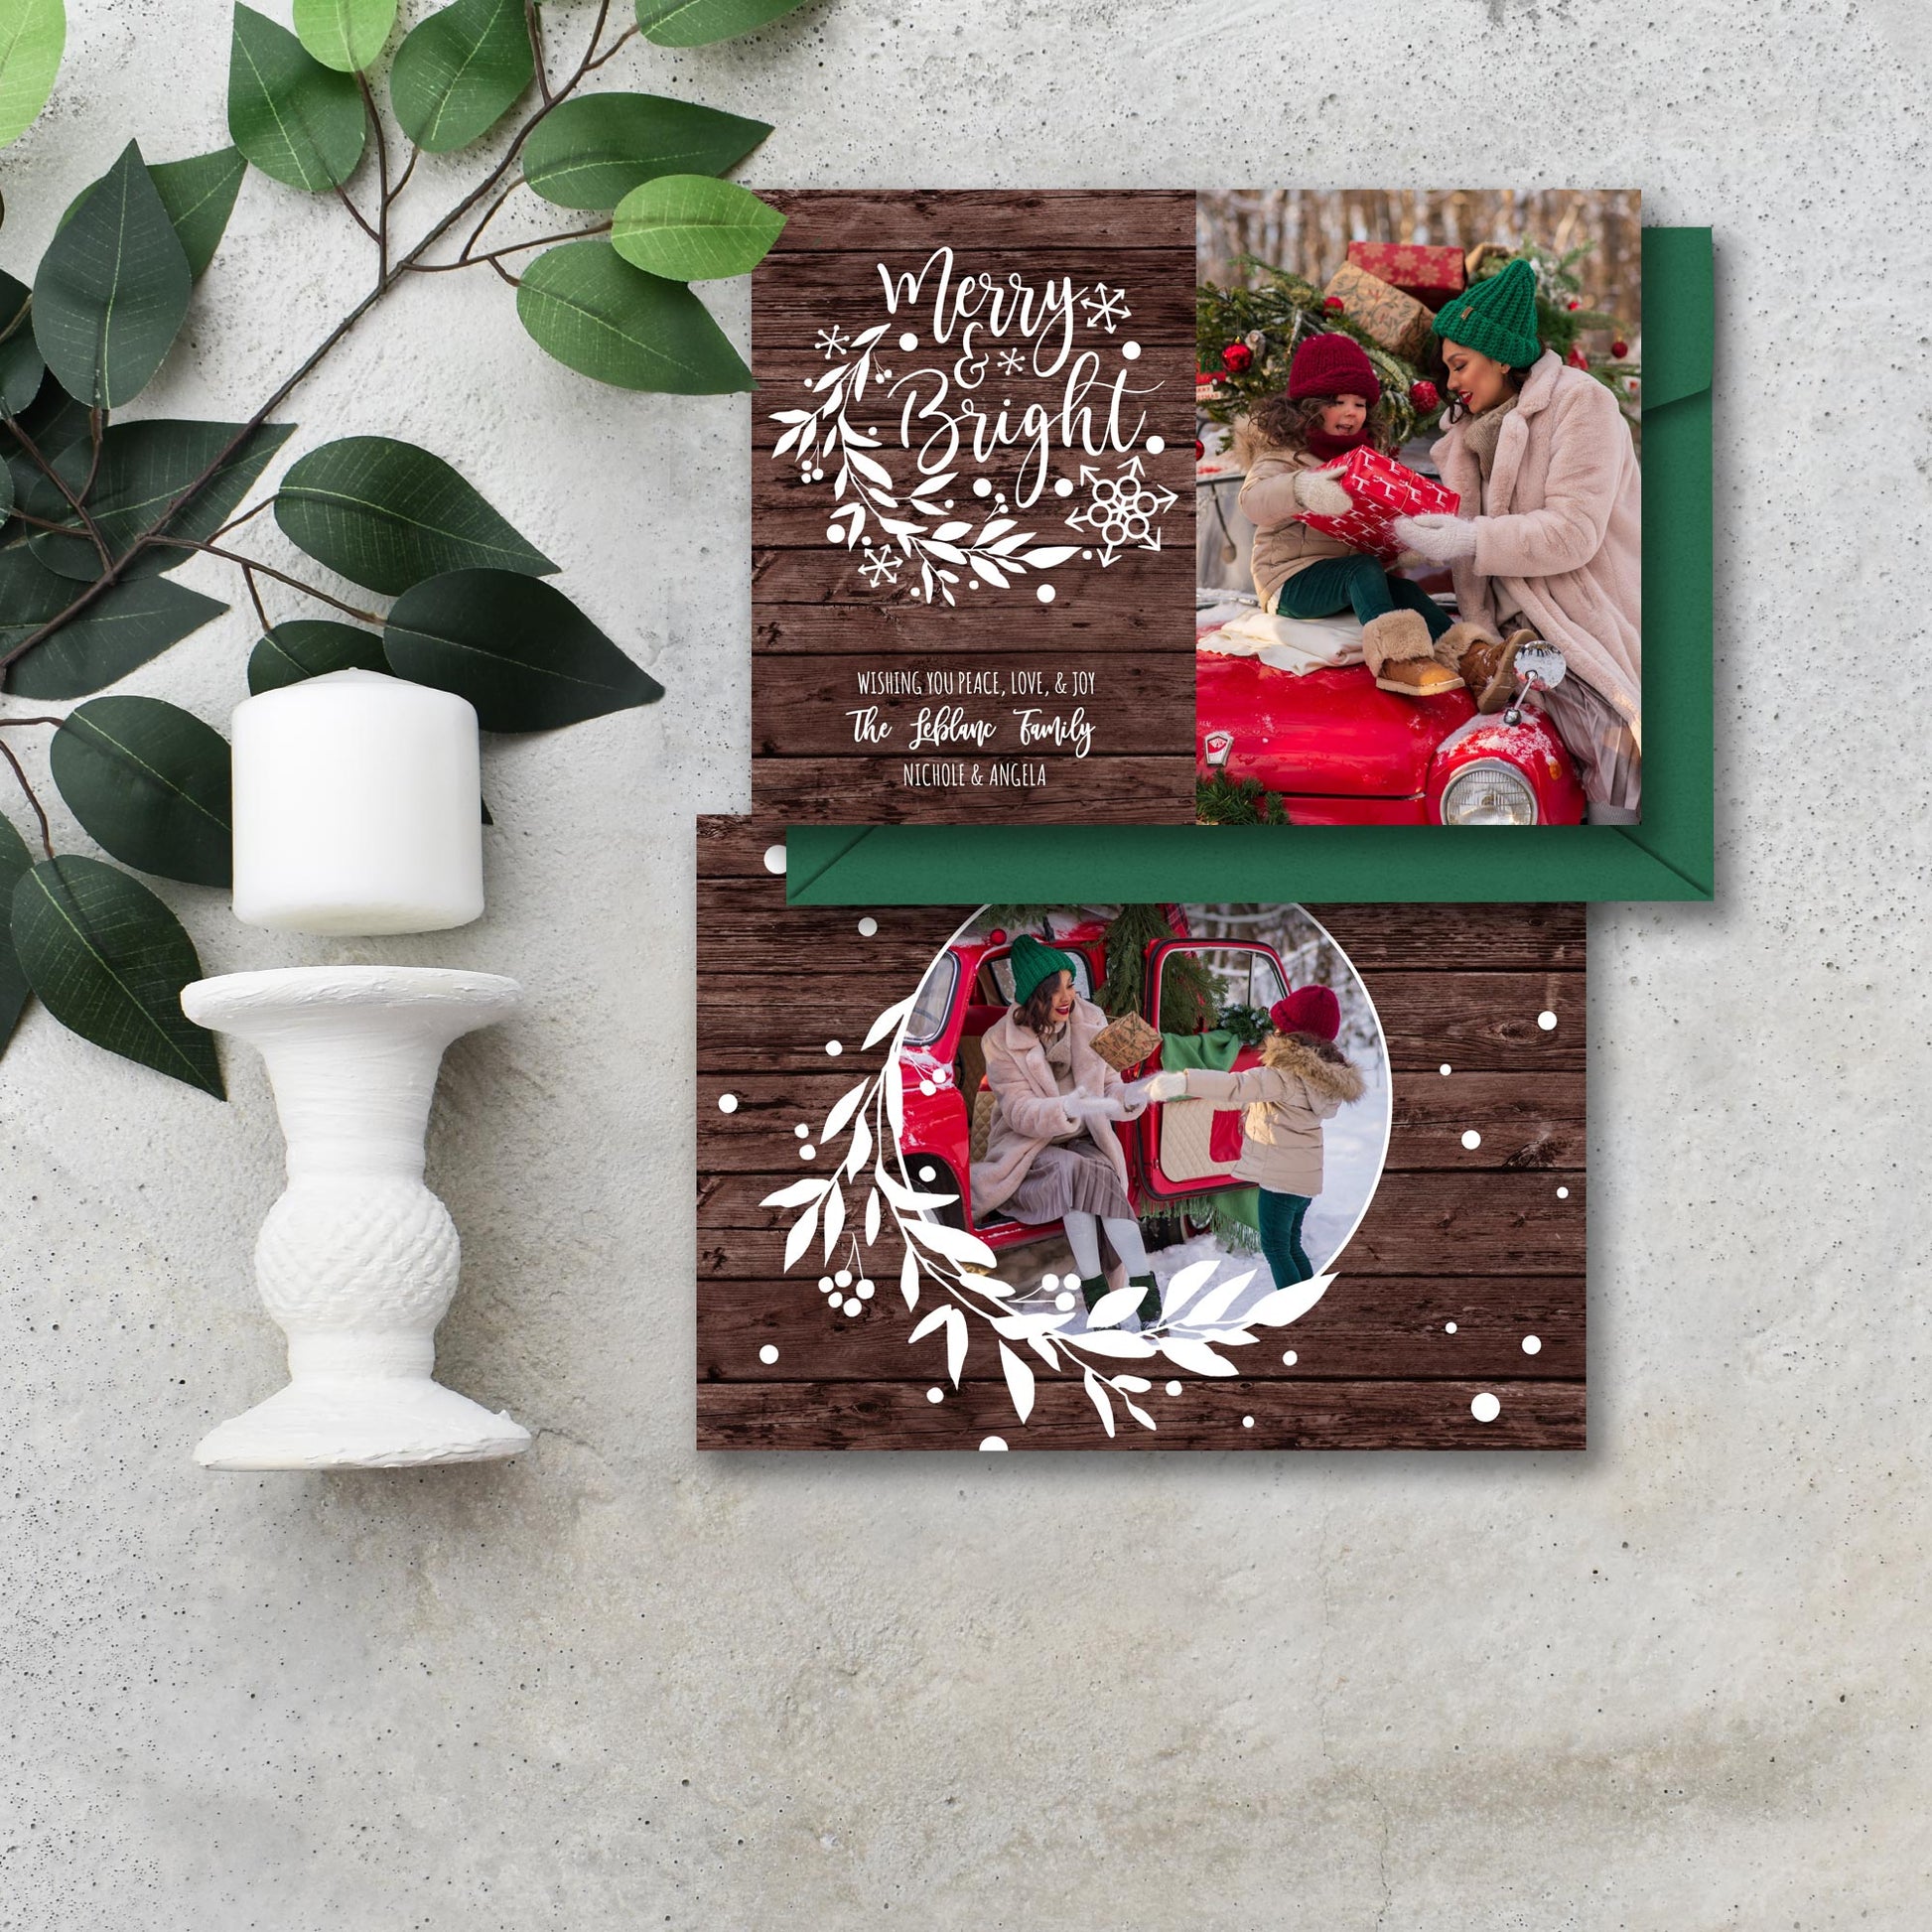 Editable Rustic Merry and Bright Christmas Photo Card Template by Playful Pixie Studio